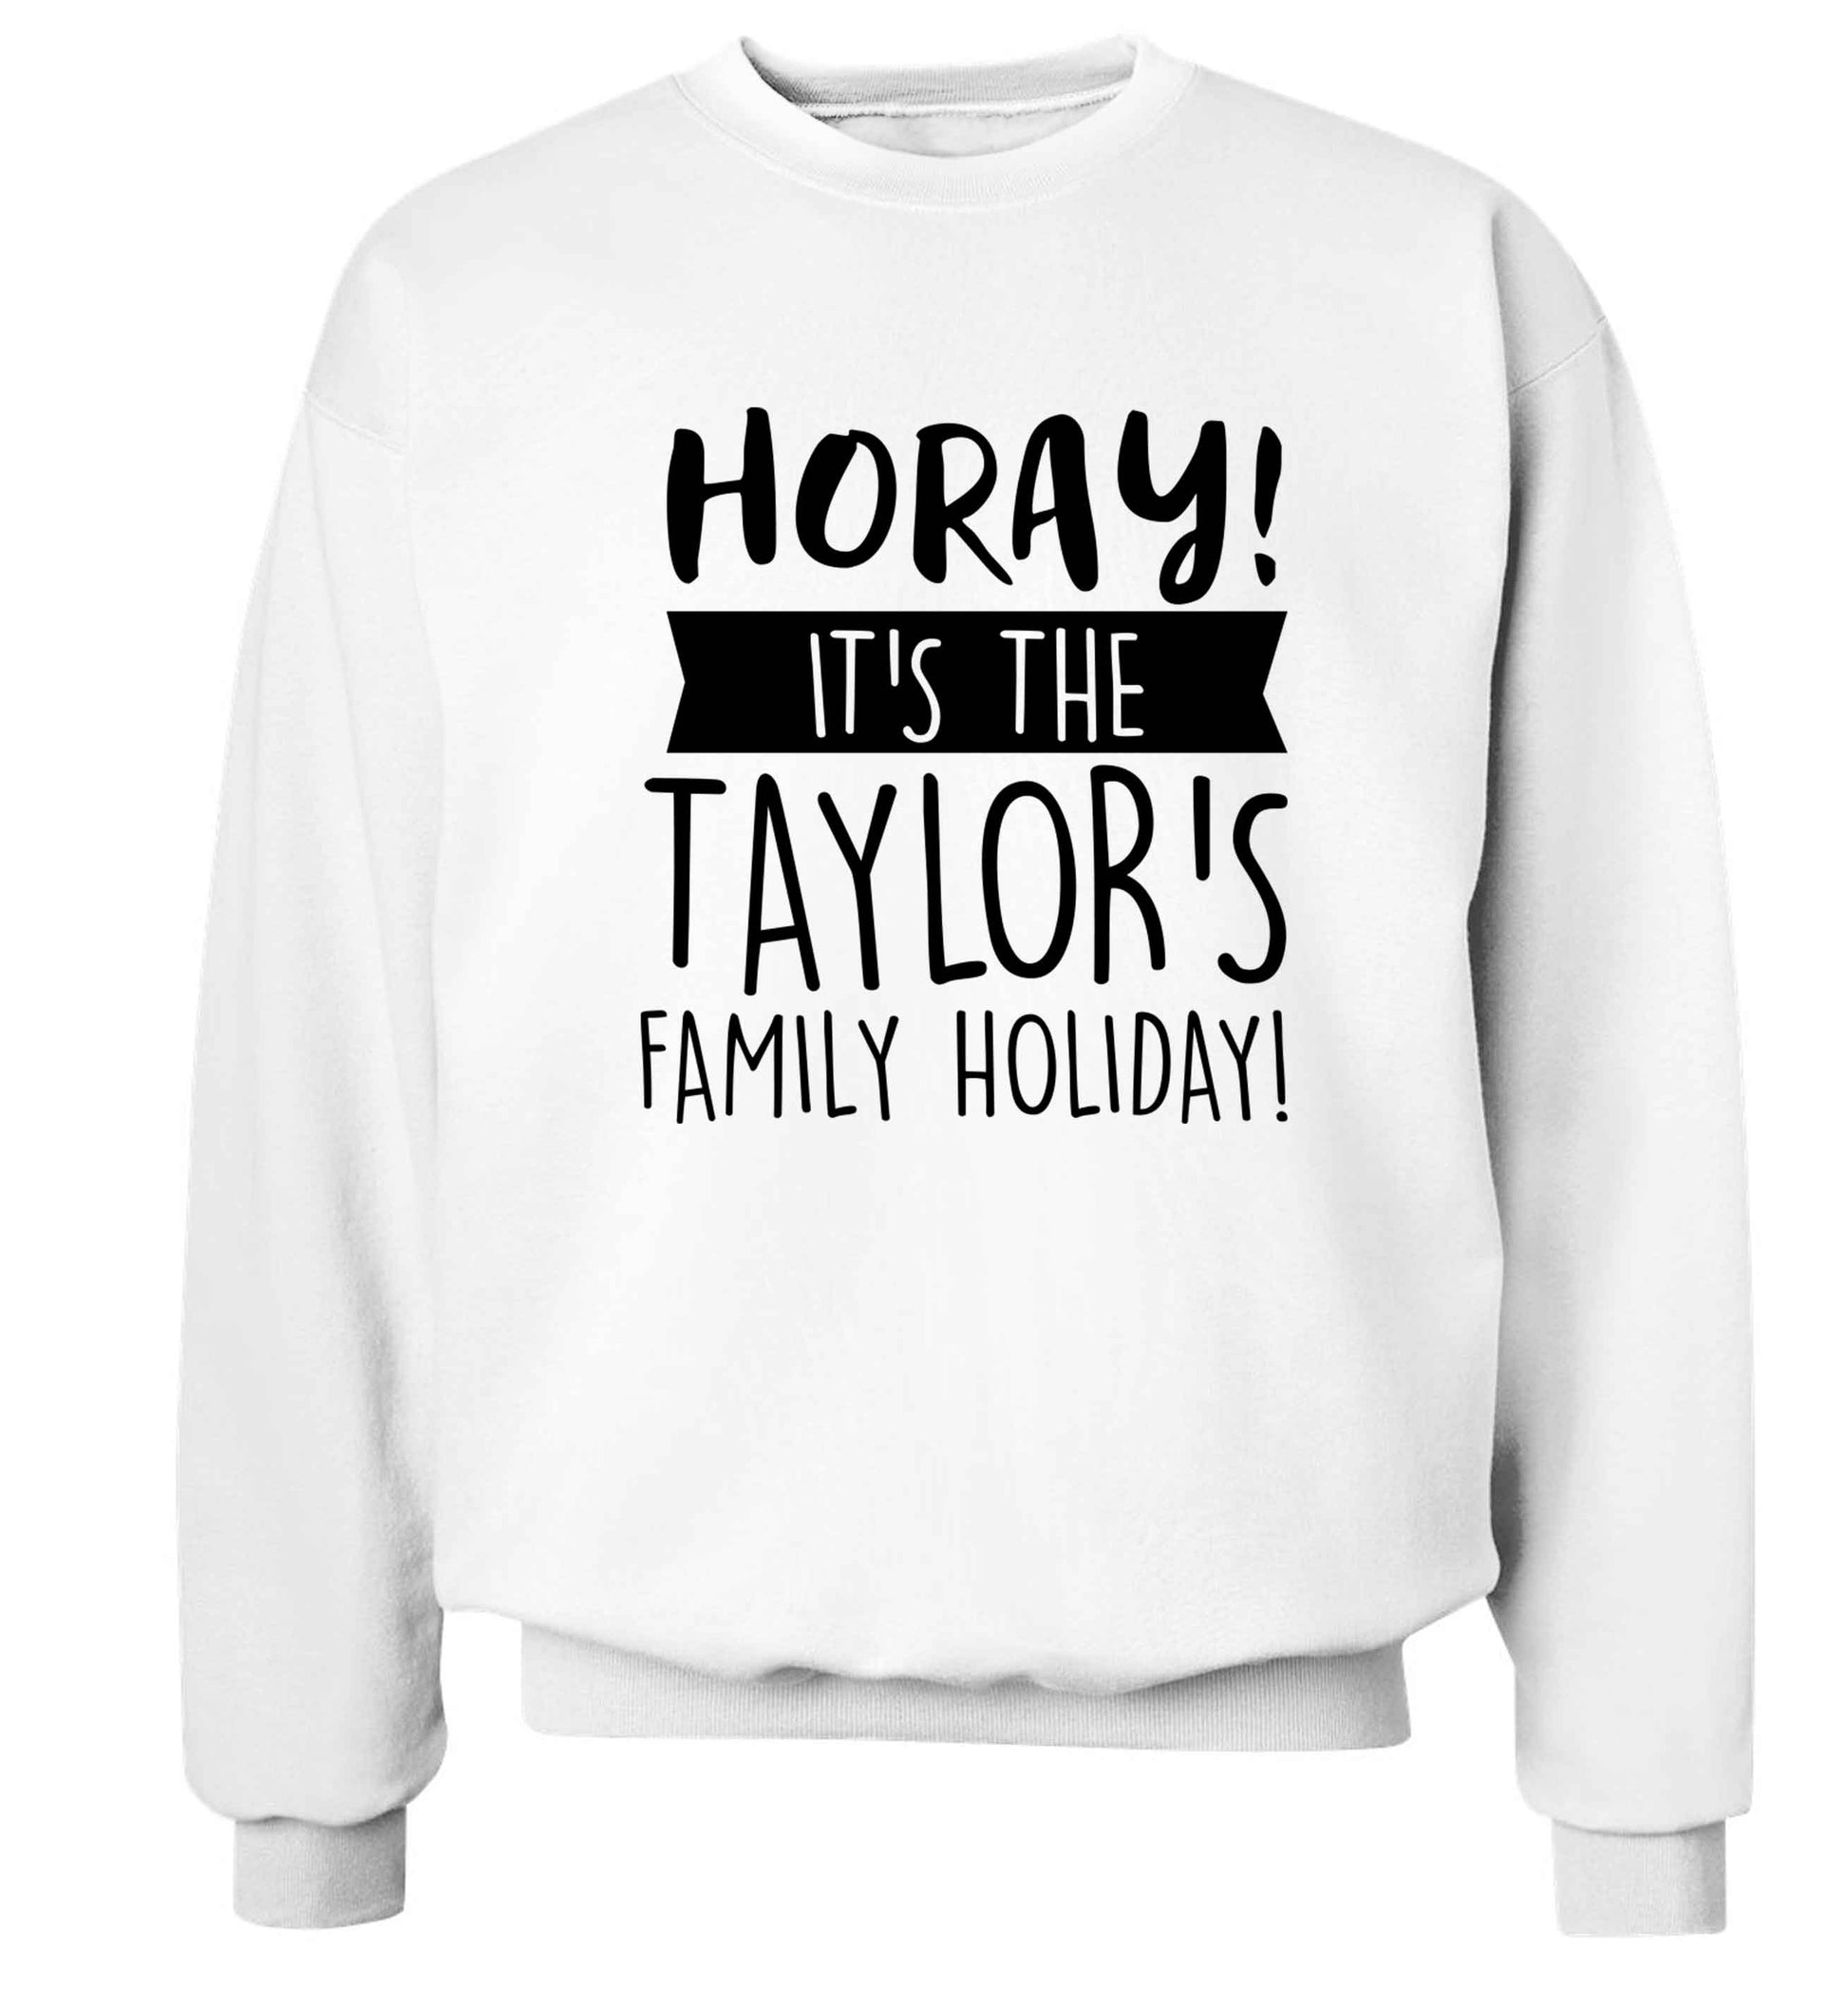 Horay it's the Taylor's family holiday! personalised item Adult's unisex white Sweater 2XL